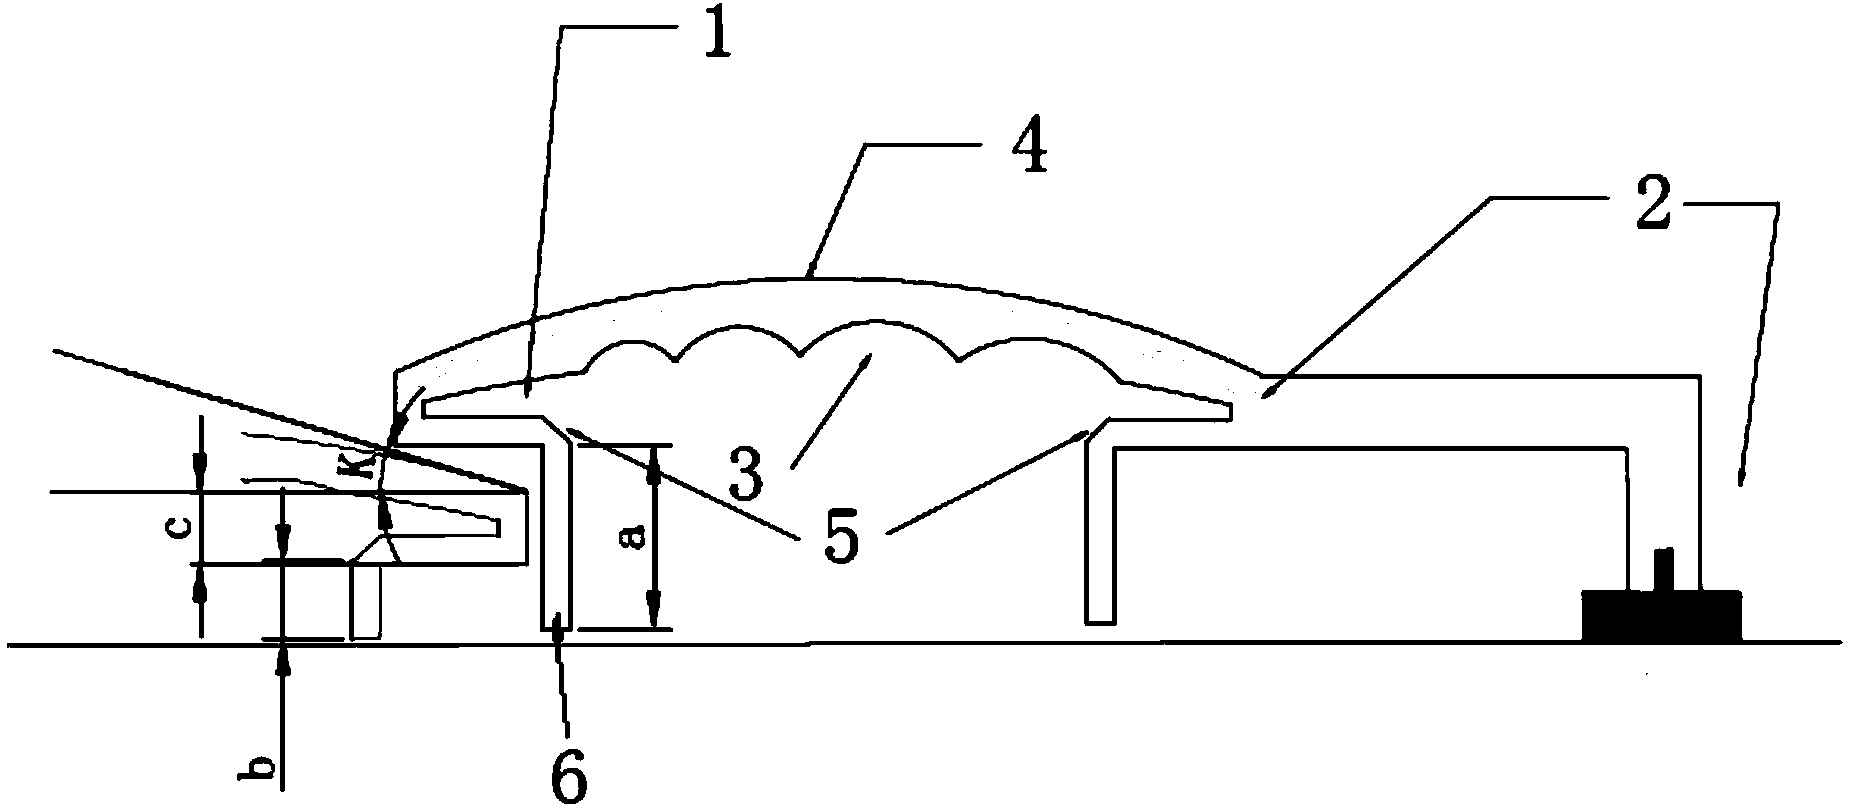 Evaporation source check plate structure